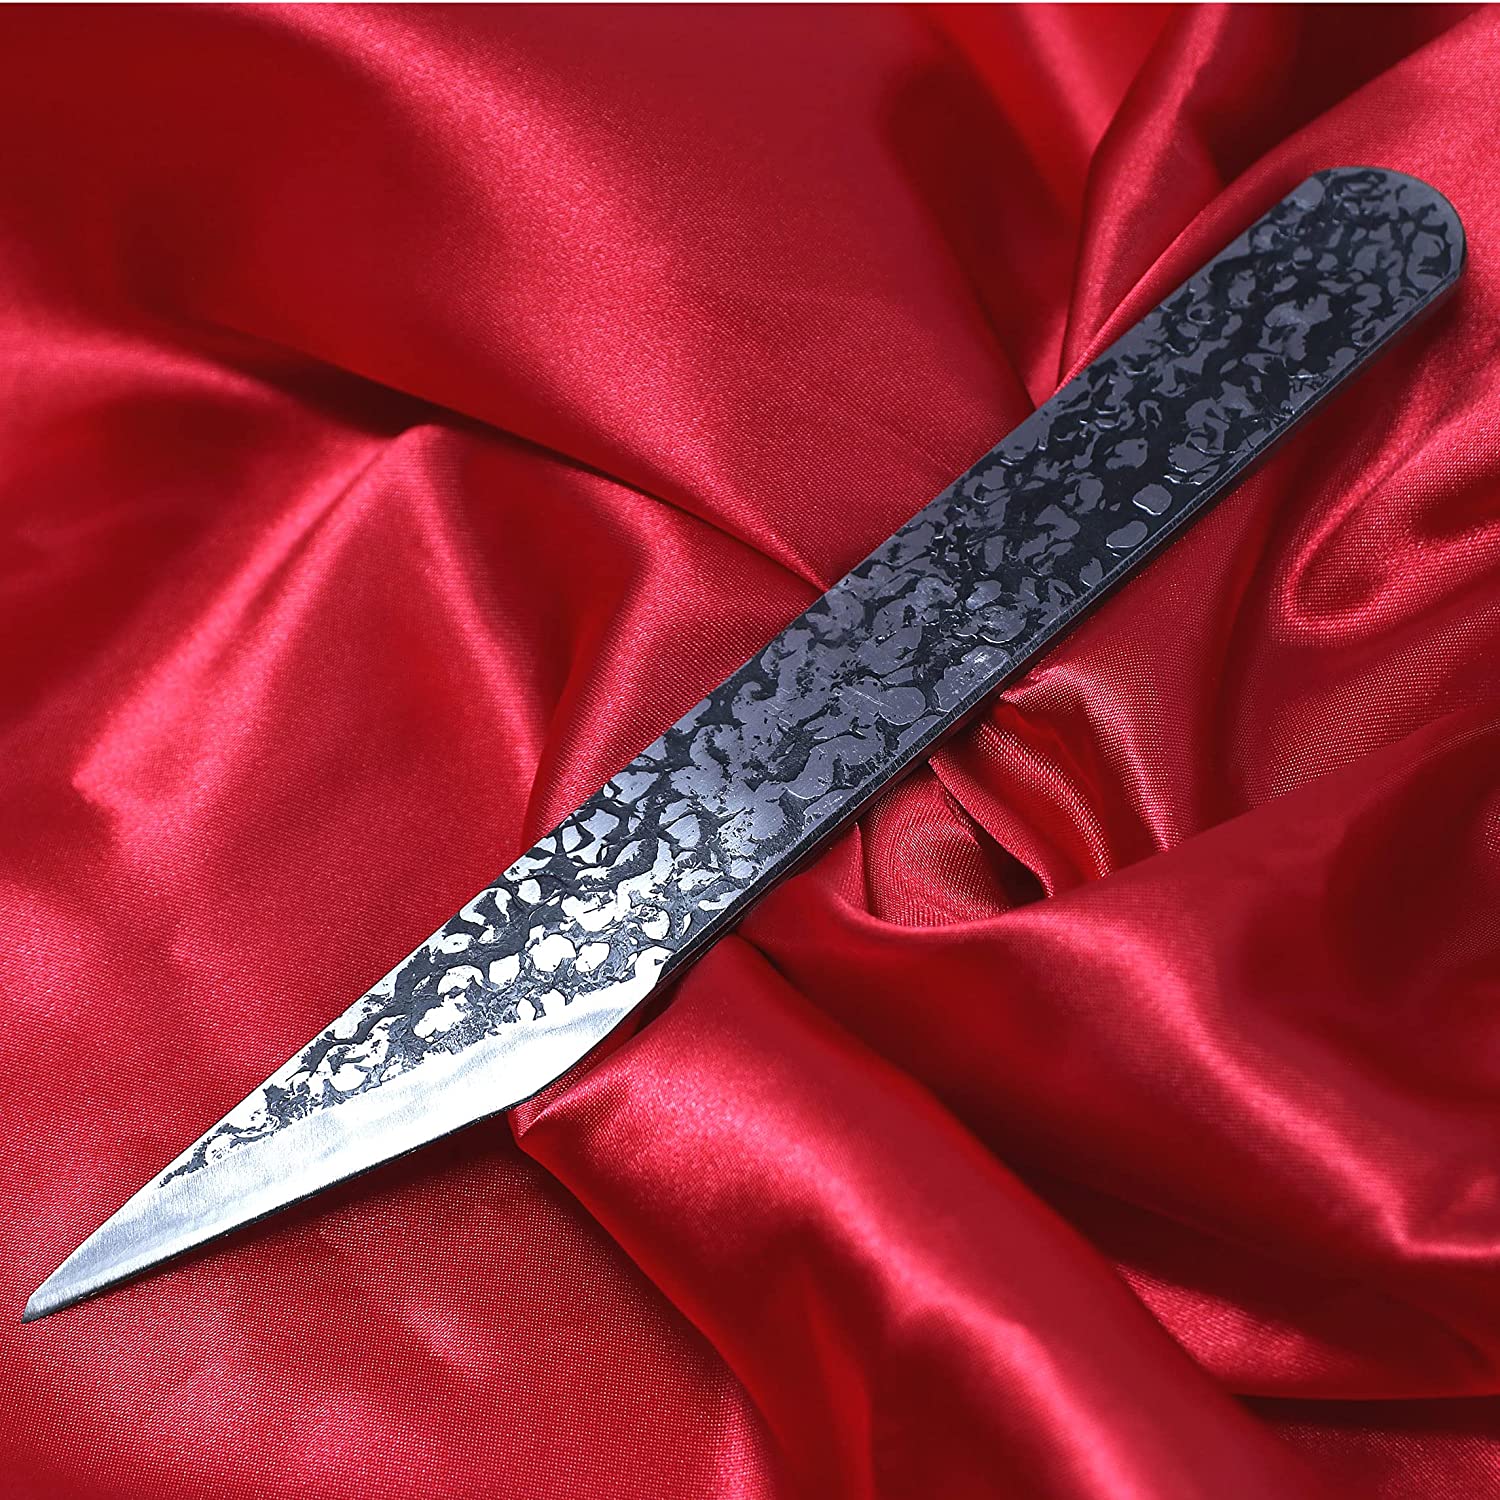  Professional Kiridashi Knife Right Hand 24mm Made in